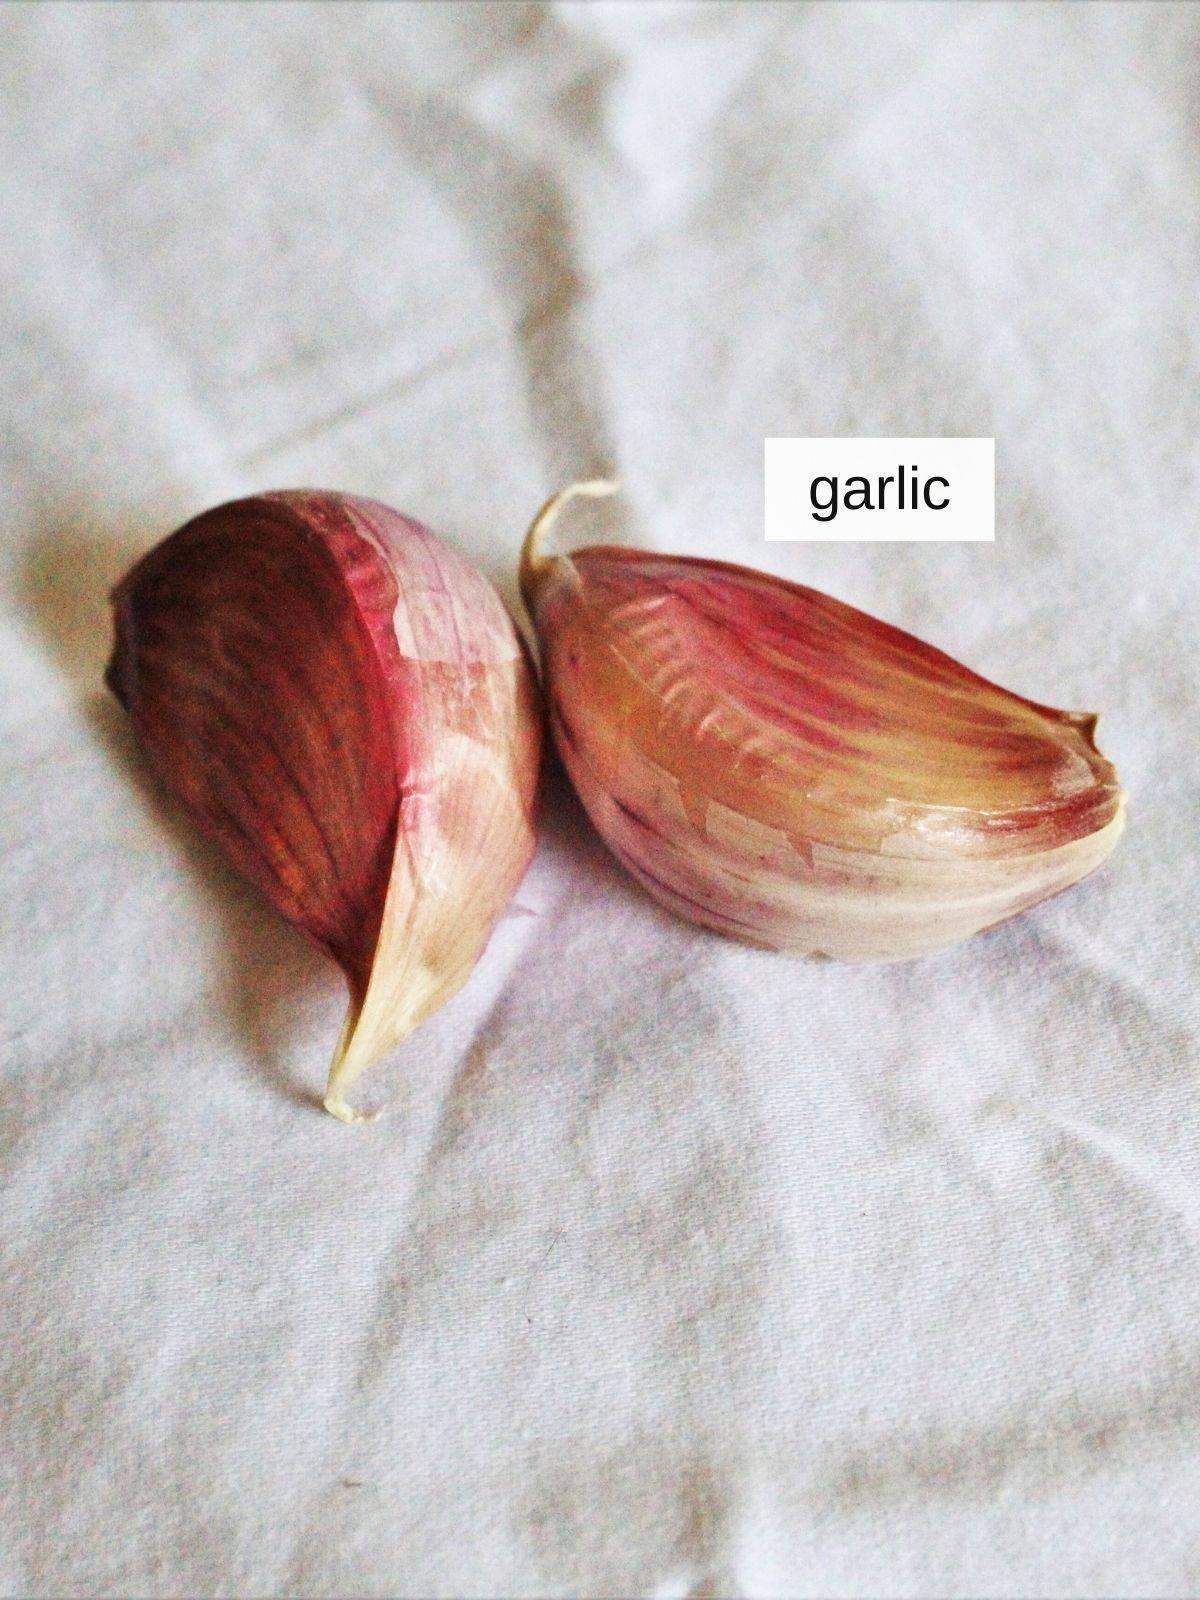 two raw garlic cloves on a white cloth.